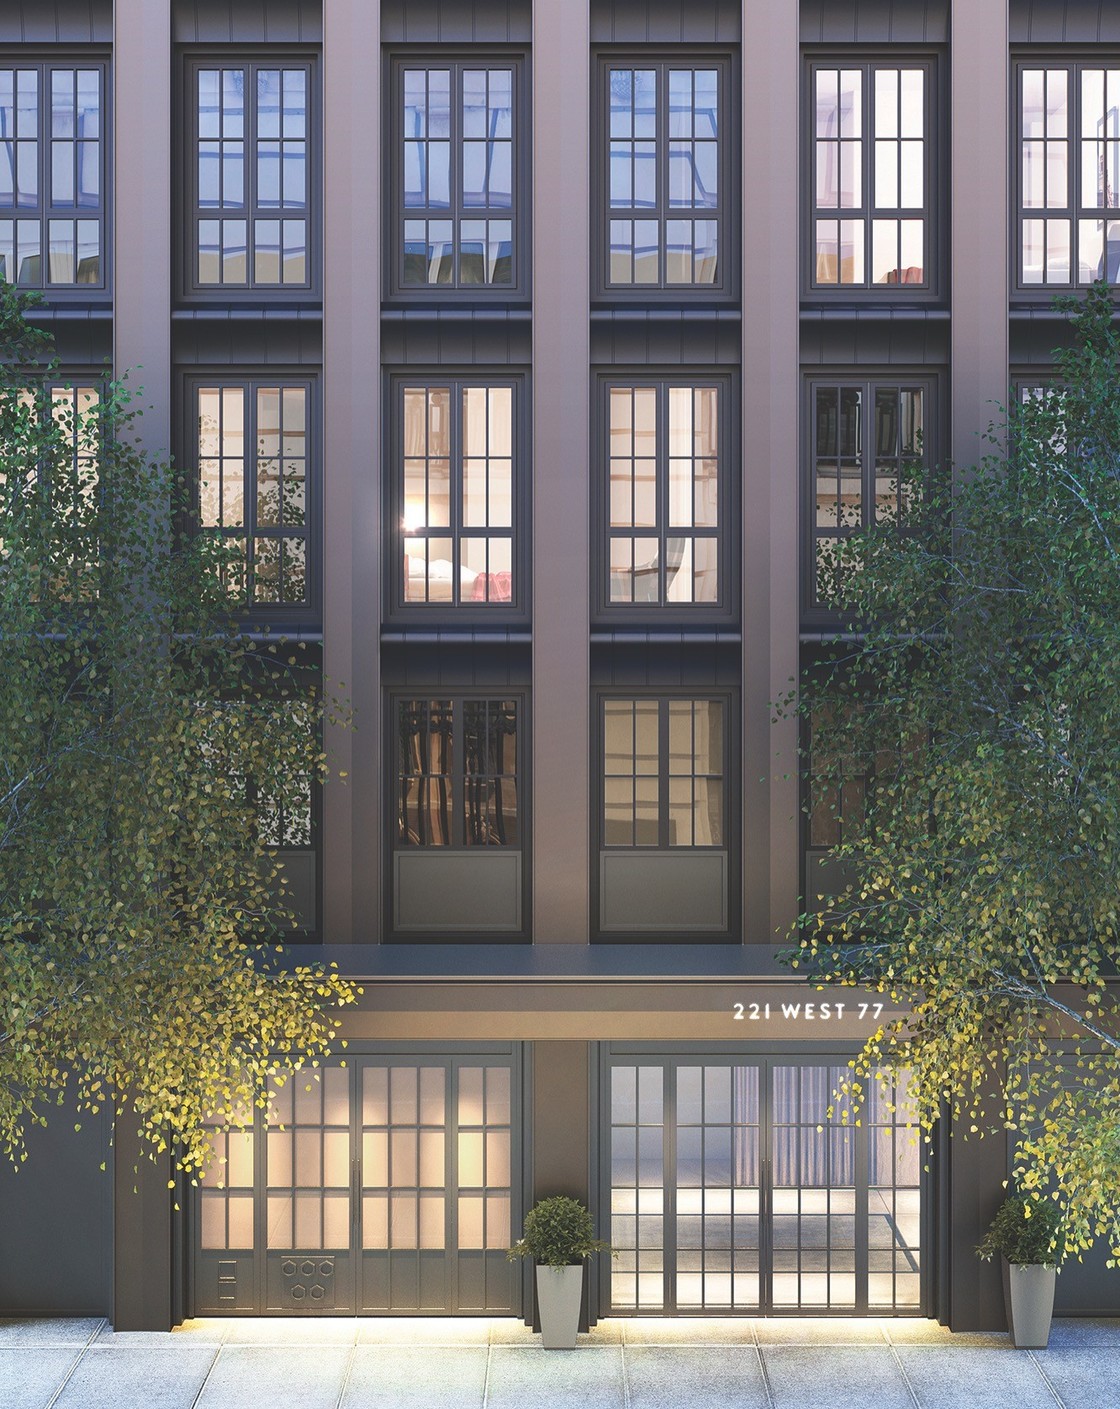 Thomas Juul-Hansen’s design pays homage to the historical architecture of the Upper West Side, but offers an inventive perspective. Traditional casement windows are combined with graduated terraces that offer outdoor access. East-facing windows, southern exposure in the common rooms, and northern views afford residents a rare, multifaceted perspective on the cityscape around them.